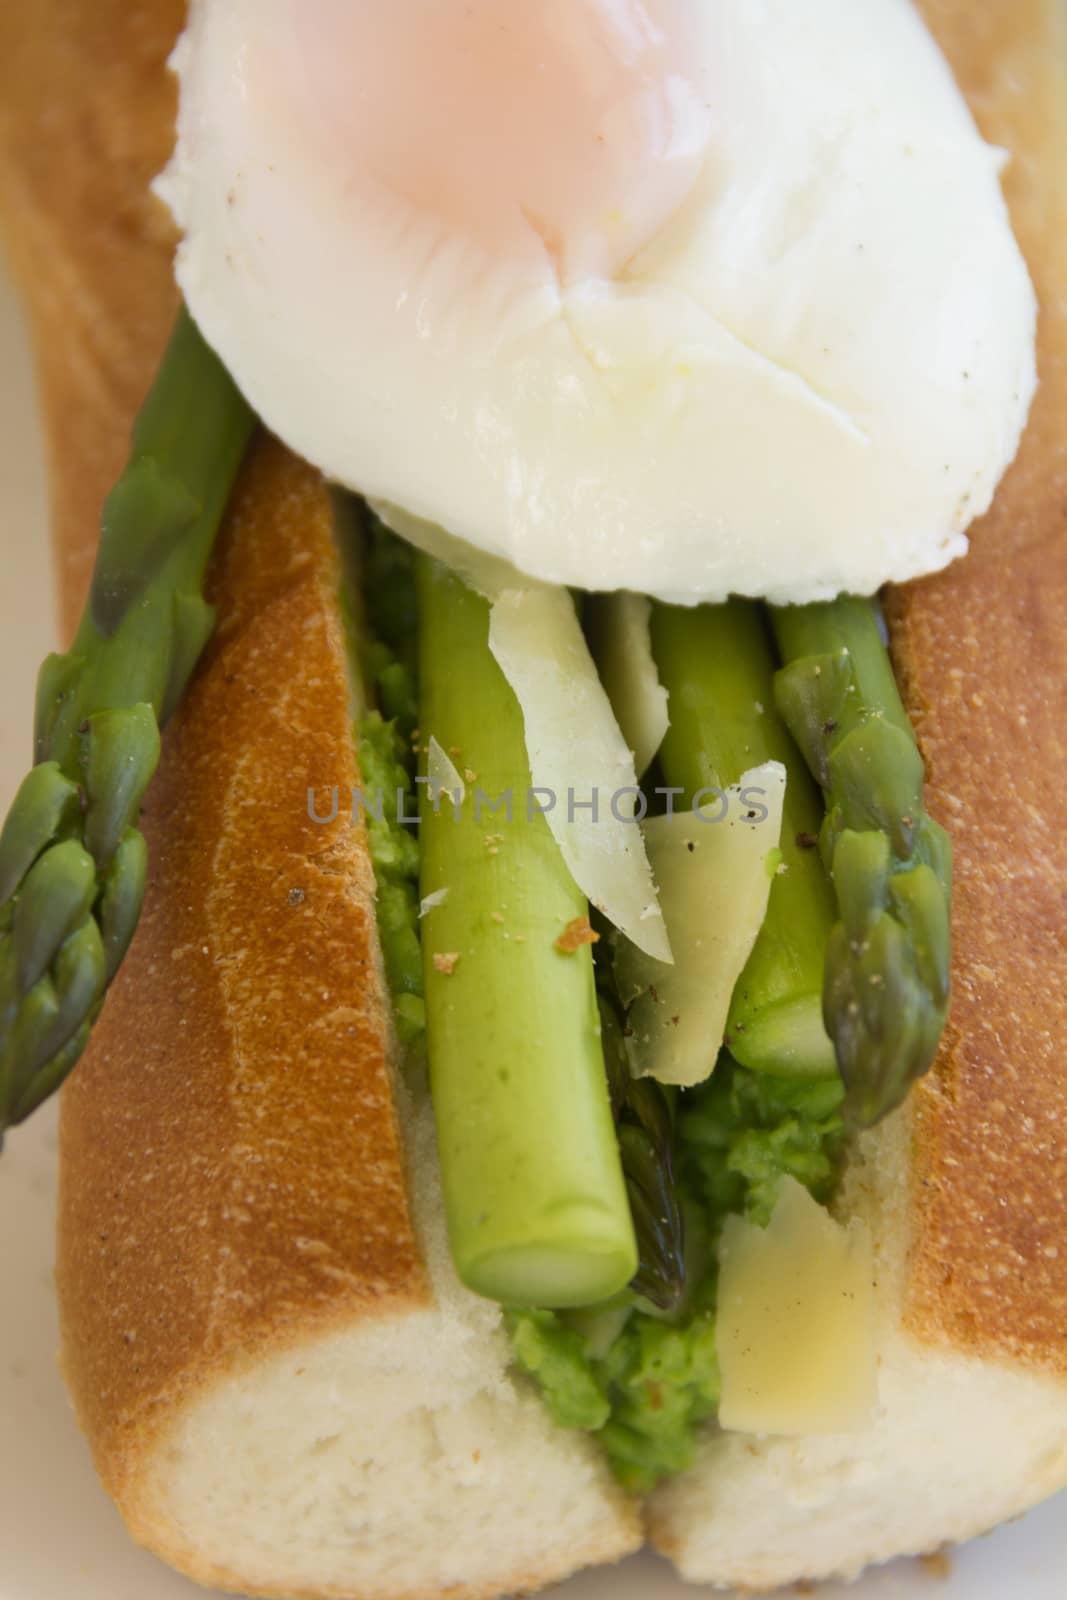 Delicious asparagus and mashed peas topped with a poached egg on a crispy baguette.